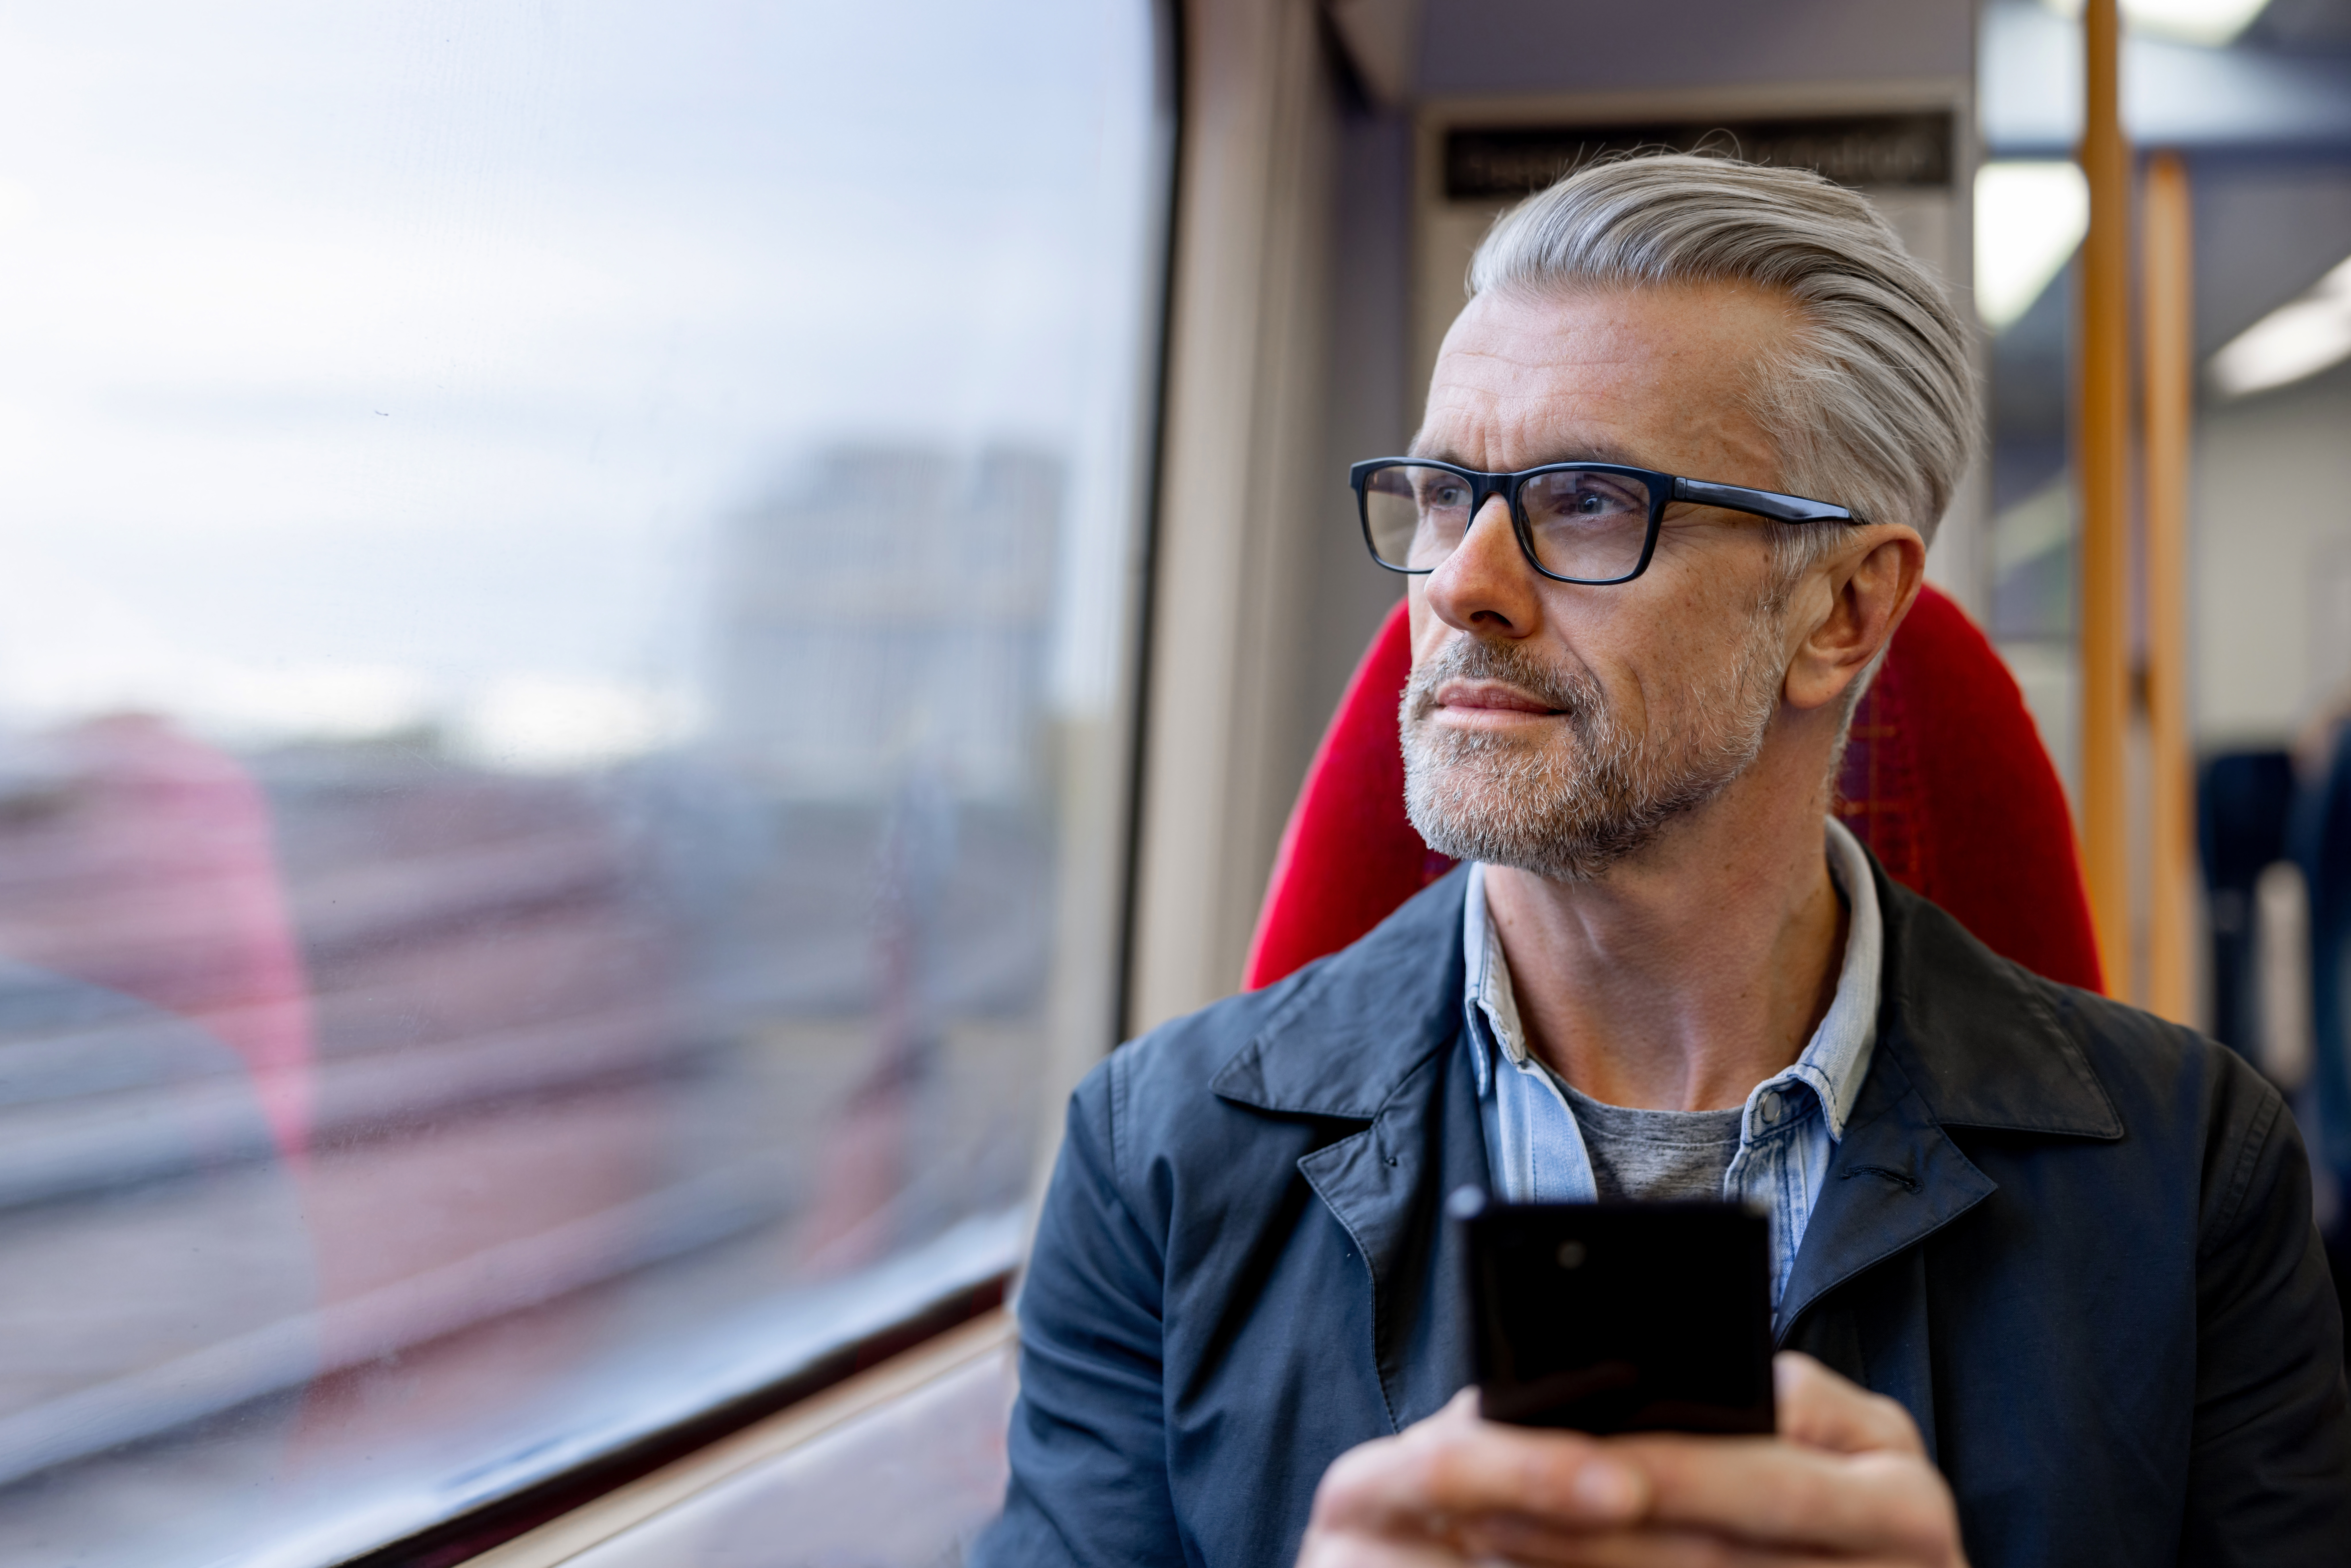 Man on a train holding a phone looking out the window